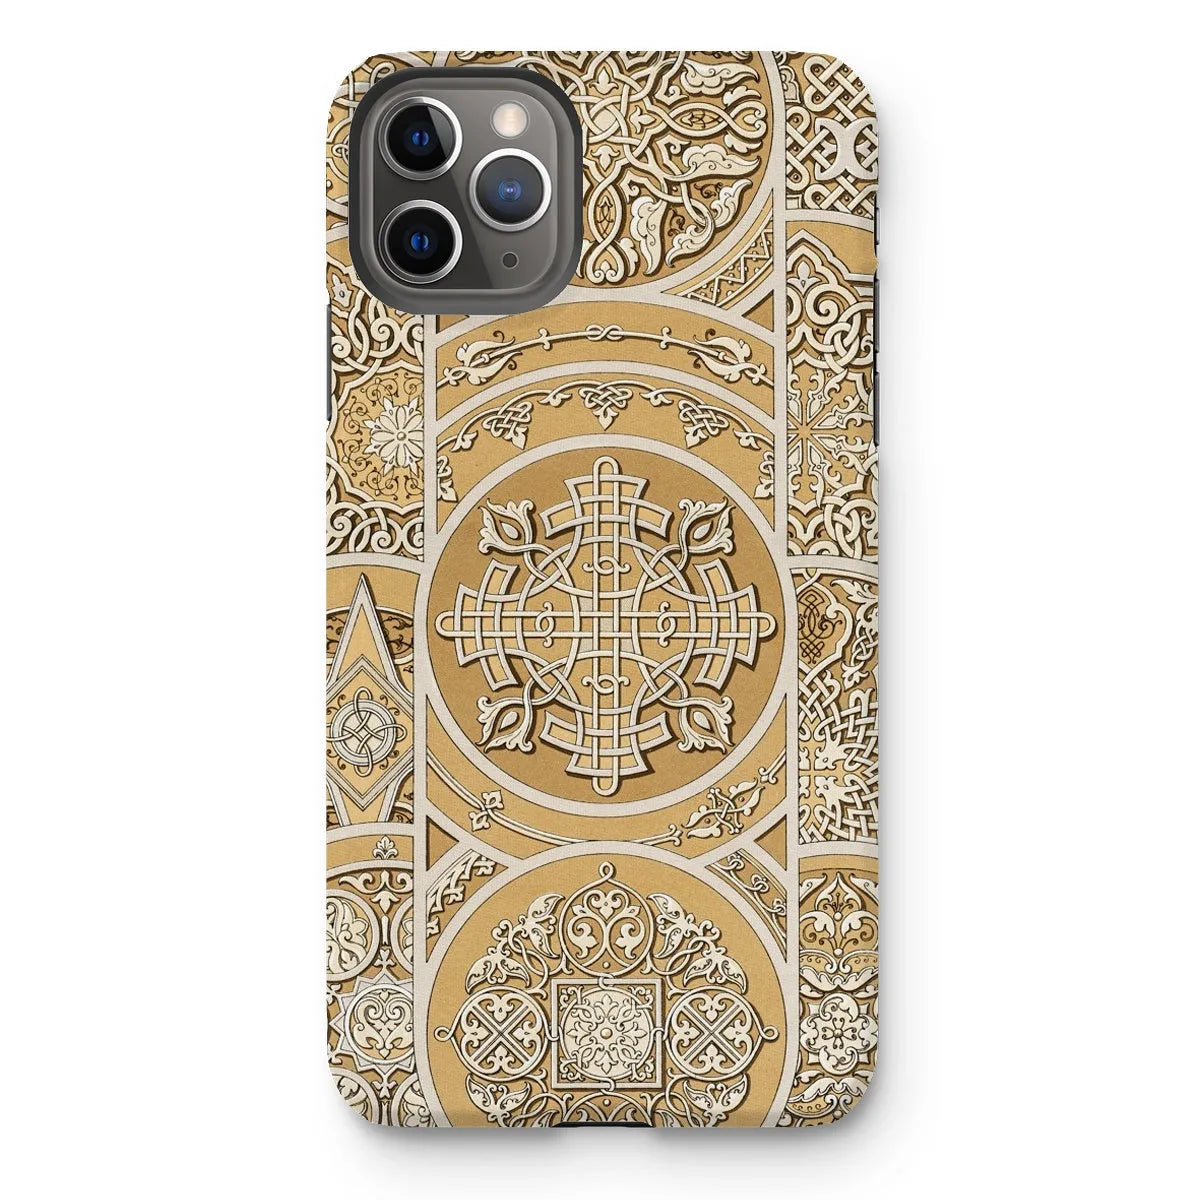 Russian Pattern By Auguste Racinet Tough Phone Case - Iphone 11 Pro Max / Matte - Mobile Phone Cases - Aesthetic Art